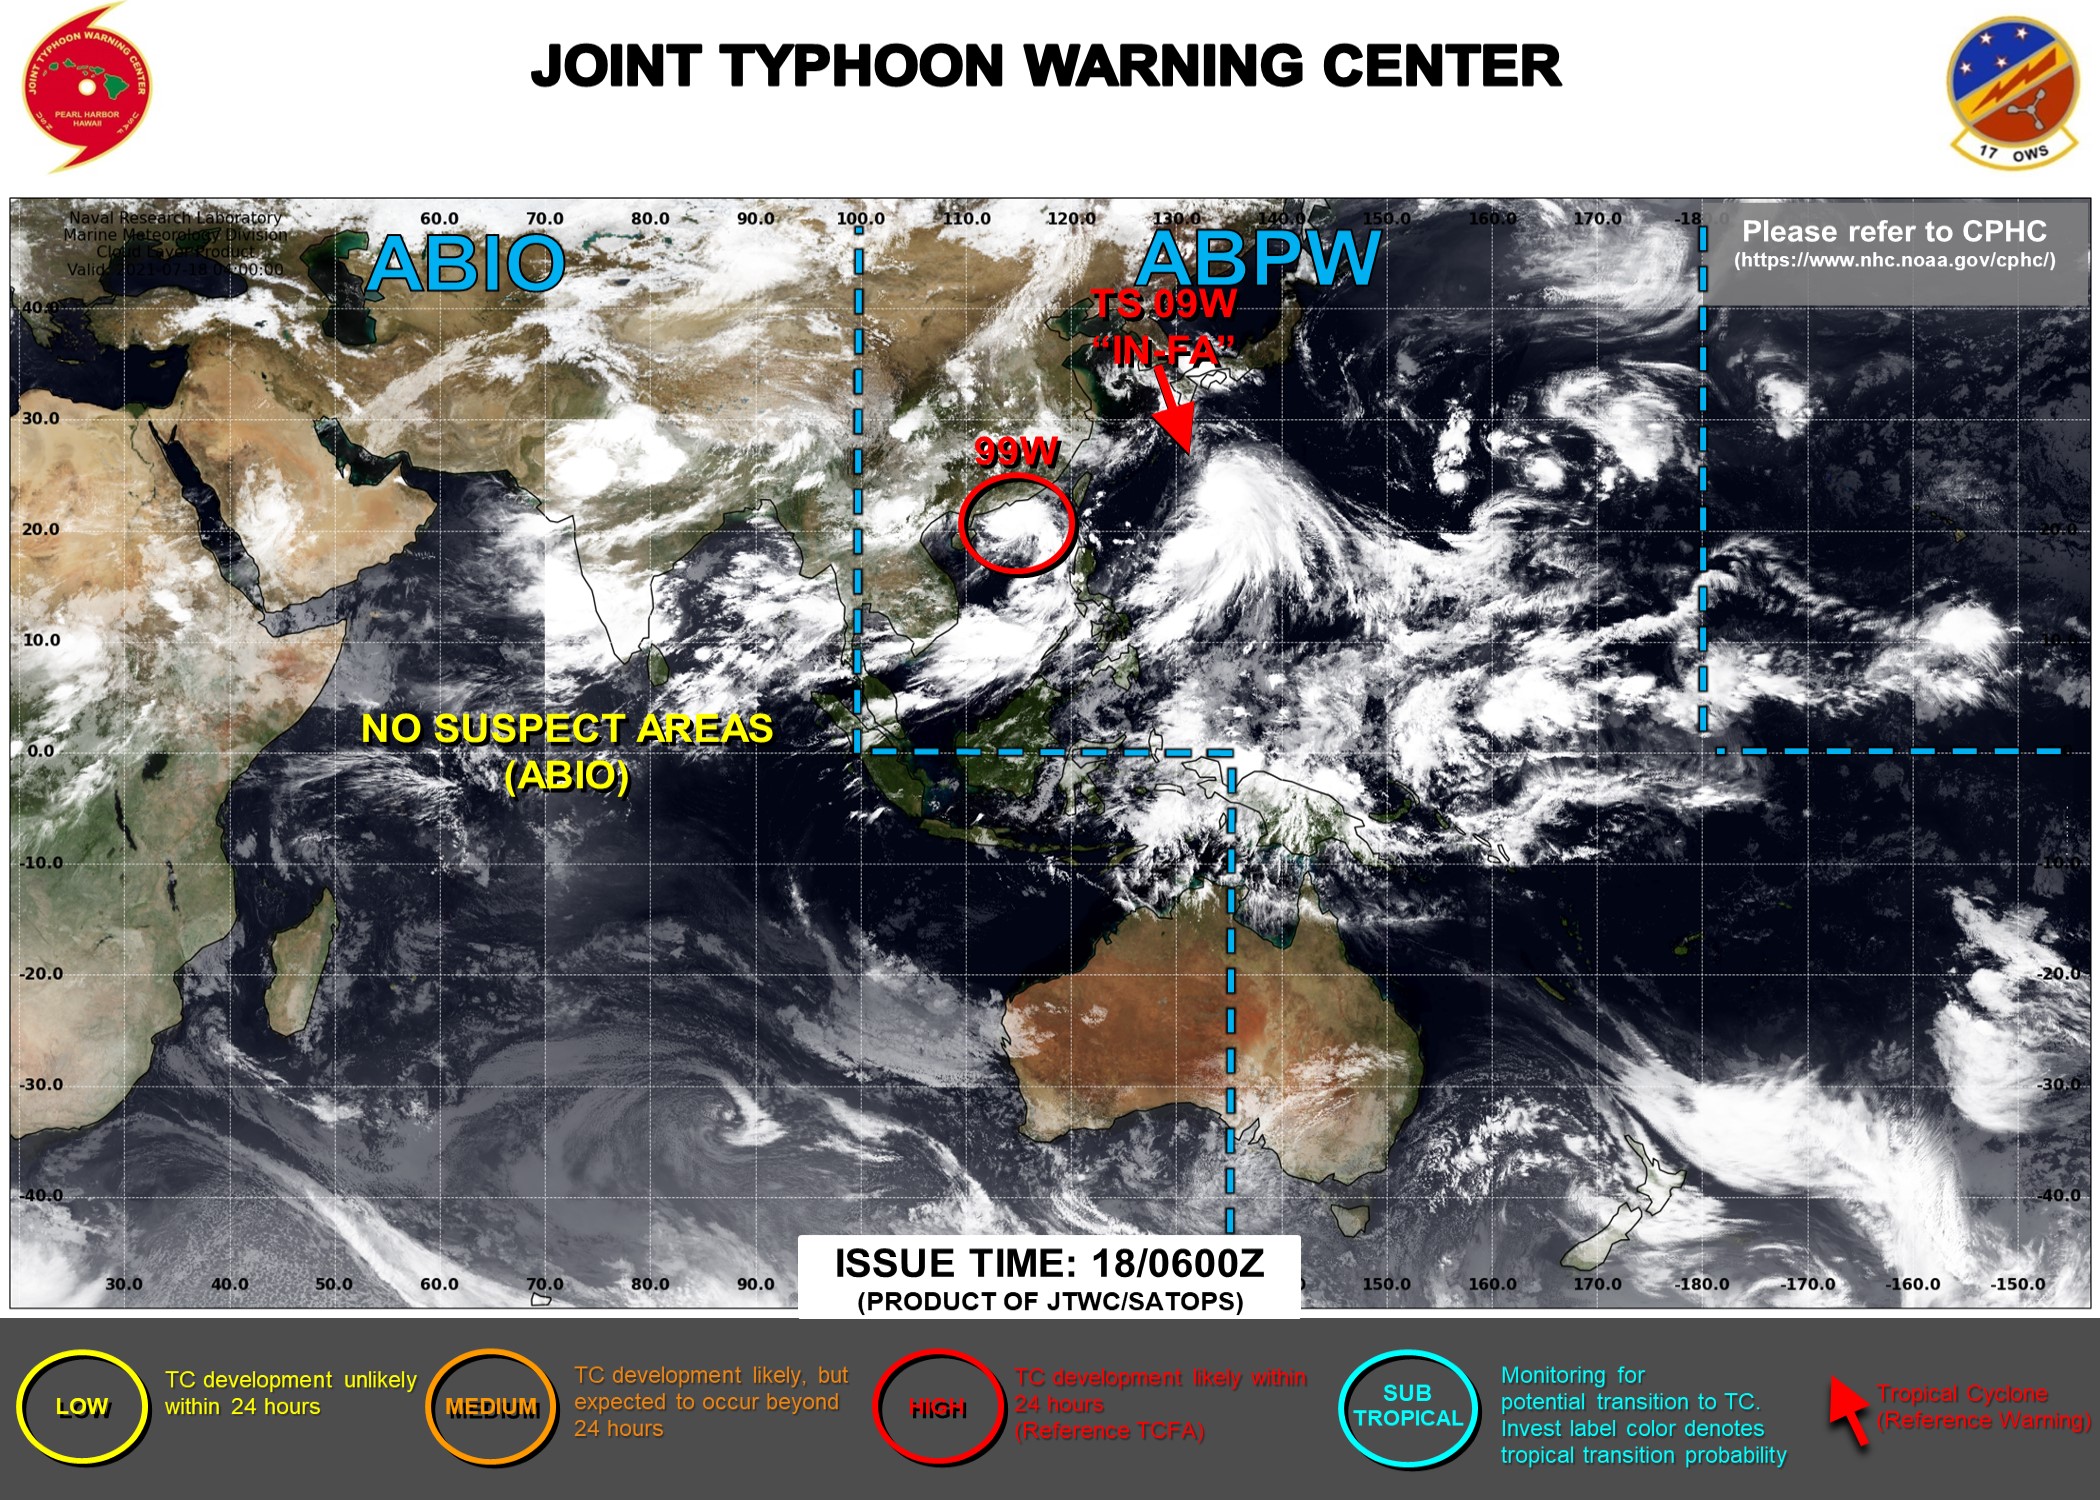 JTWC HAS BEEN ISSUING 6HOURLY WARNINGS AND 3HOURLY SATELLITE BULLETINS ON 09W(IN-FA). 3HOURLY SATELLITE BULLETINS ARE ISSUED ON INVEST 99W.